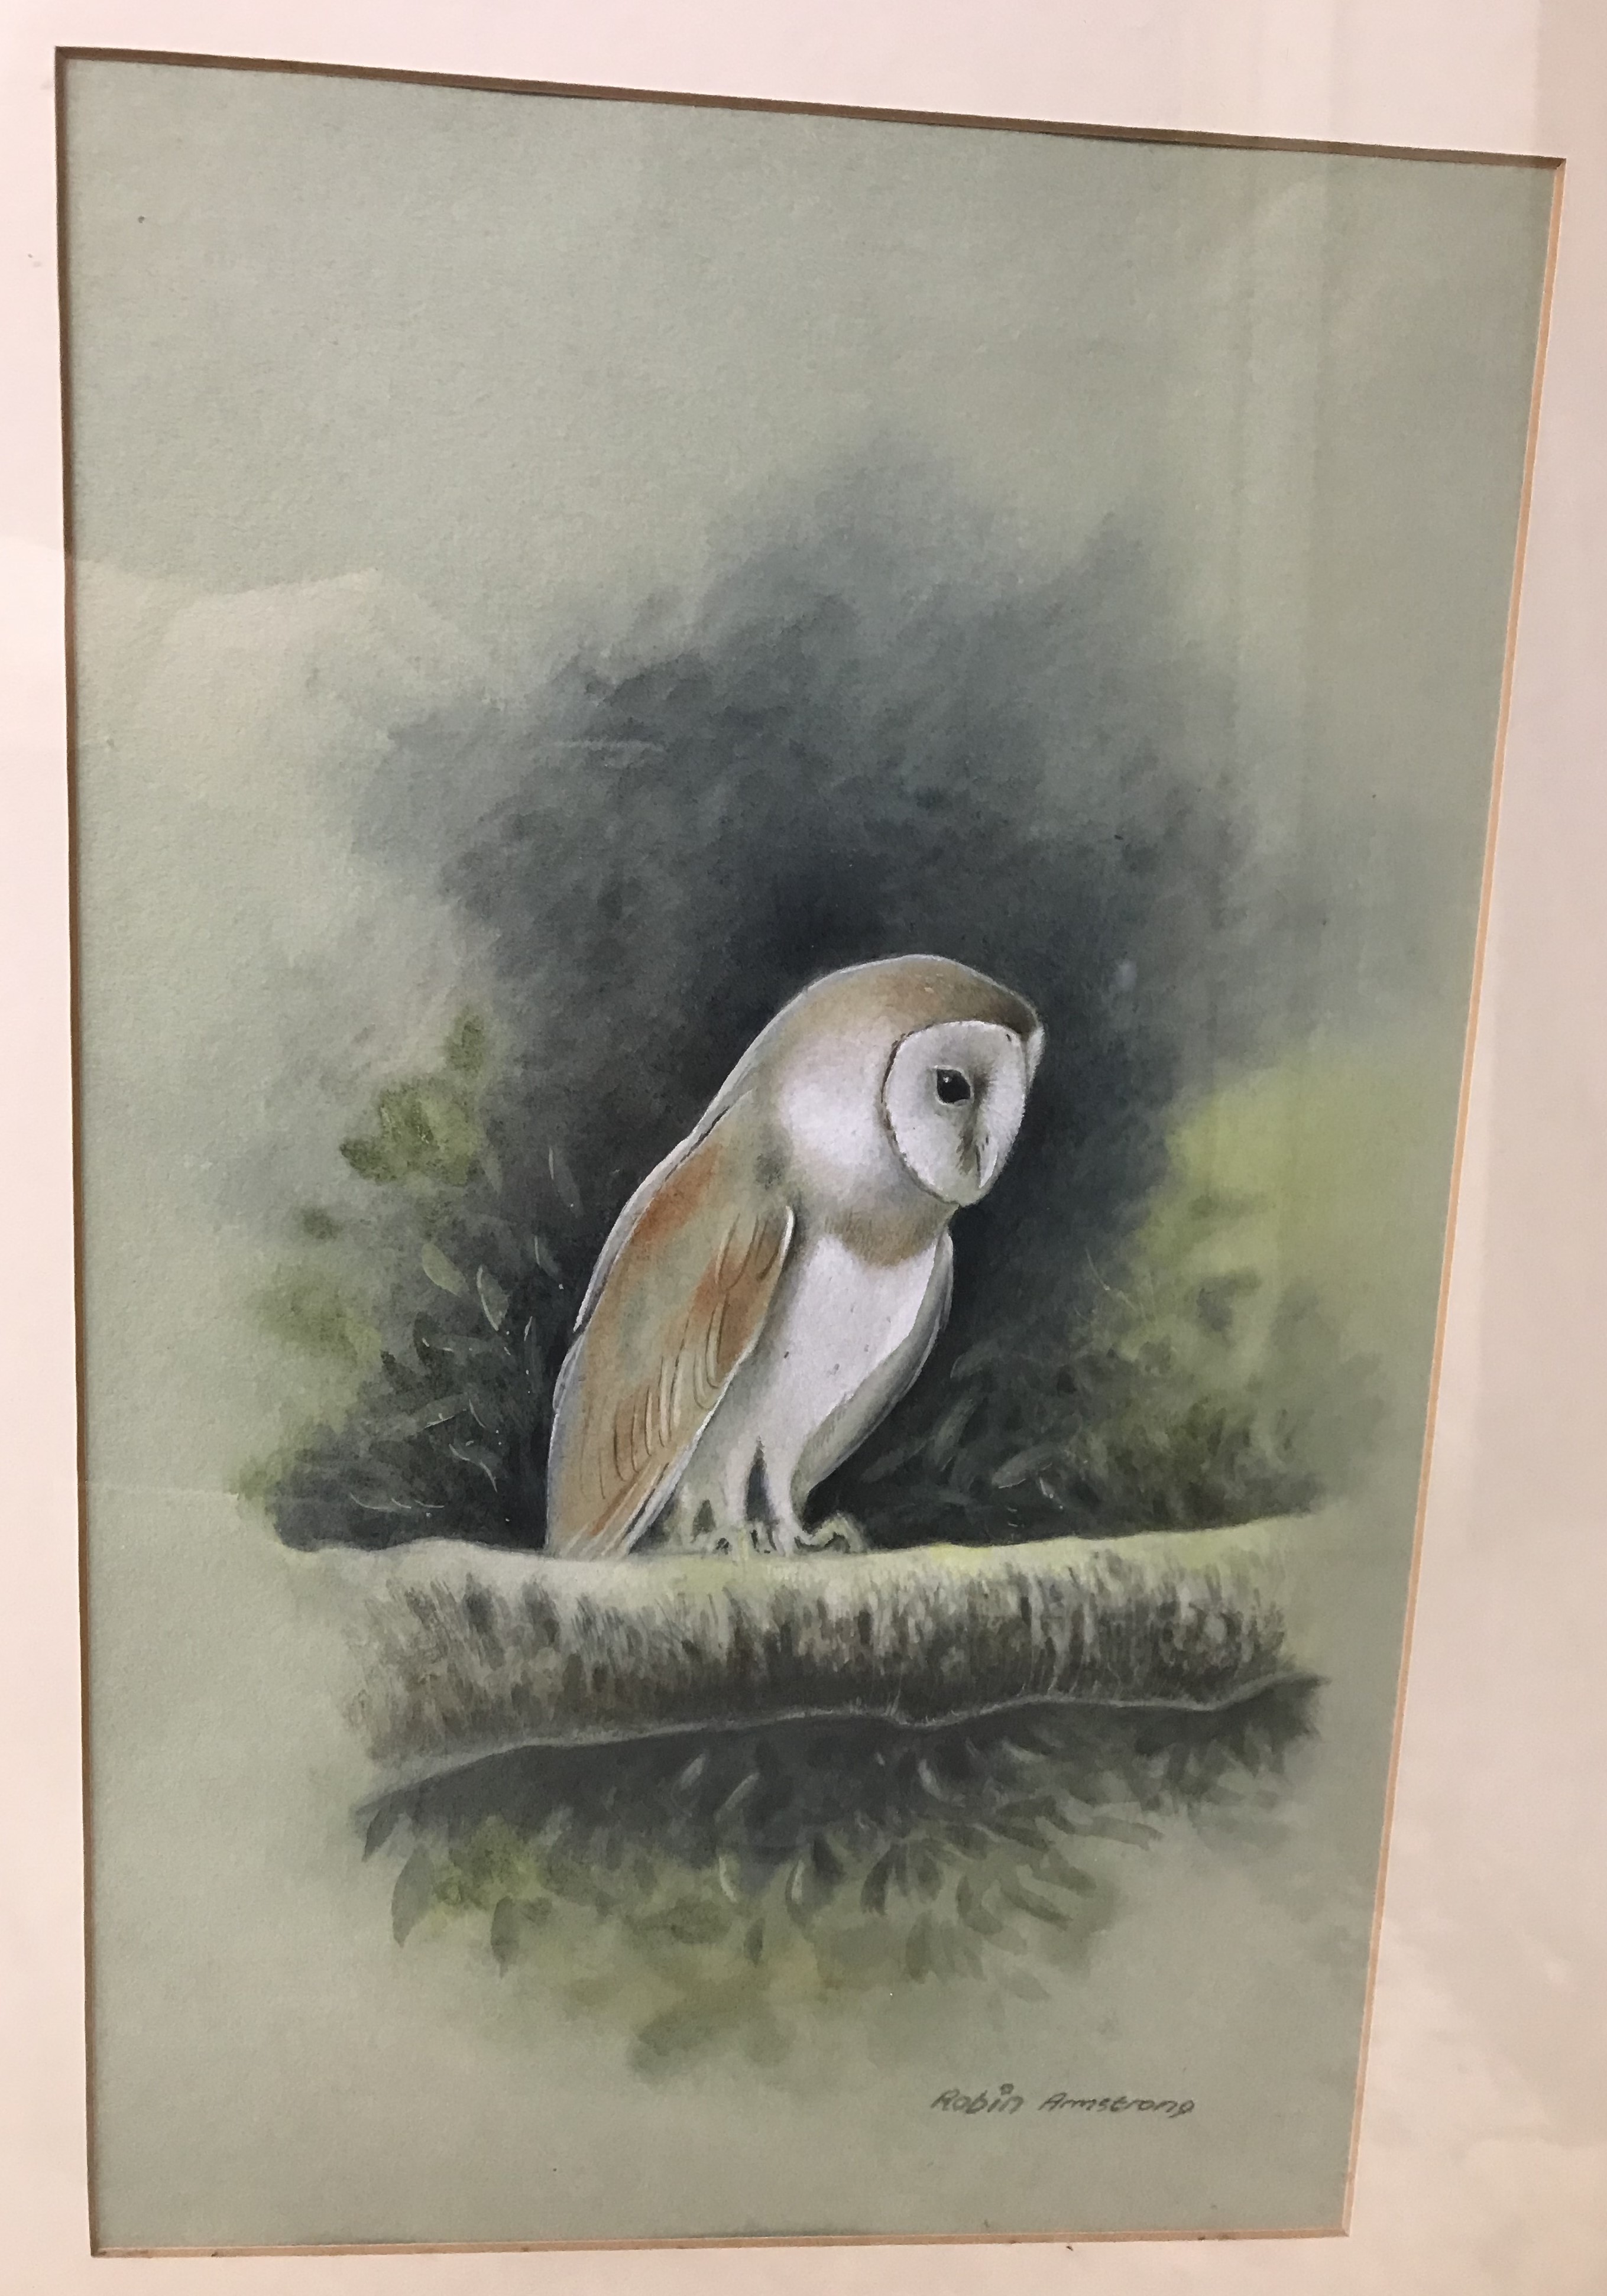 ROBIN ARMSTRONG "Barn owl on a branch", watercolour heightened with white, signed lower right, - Image 3 of 5